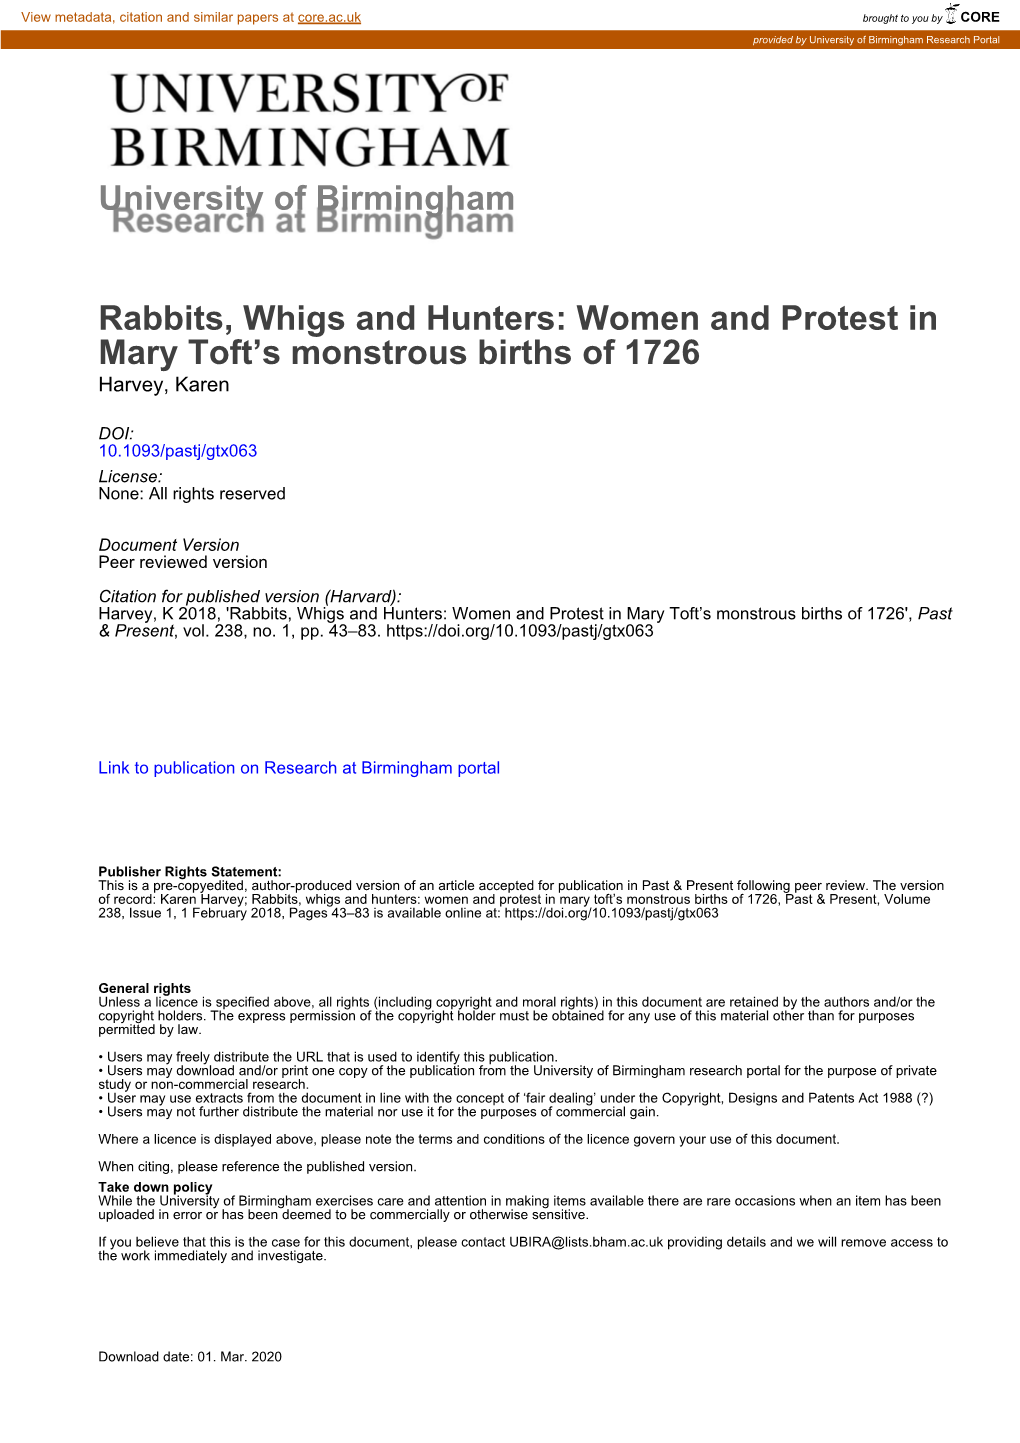 Women and Protest in Mary Toft's Monstrous Births of 1726